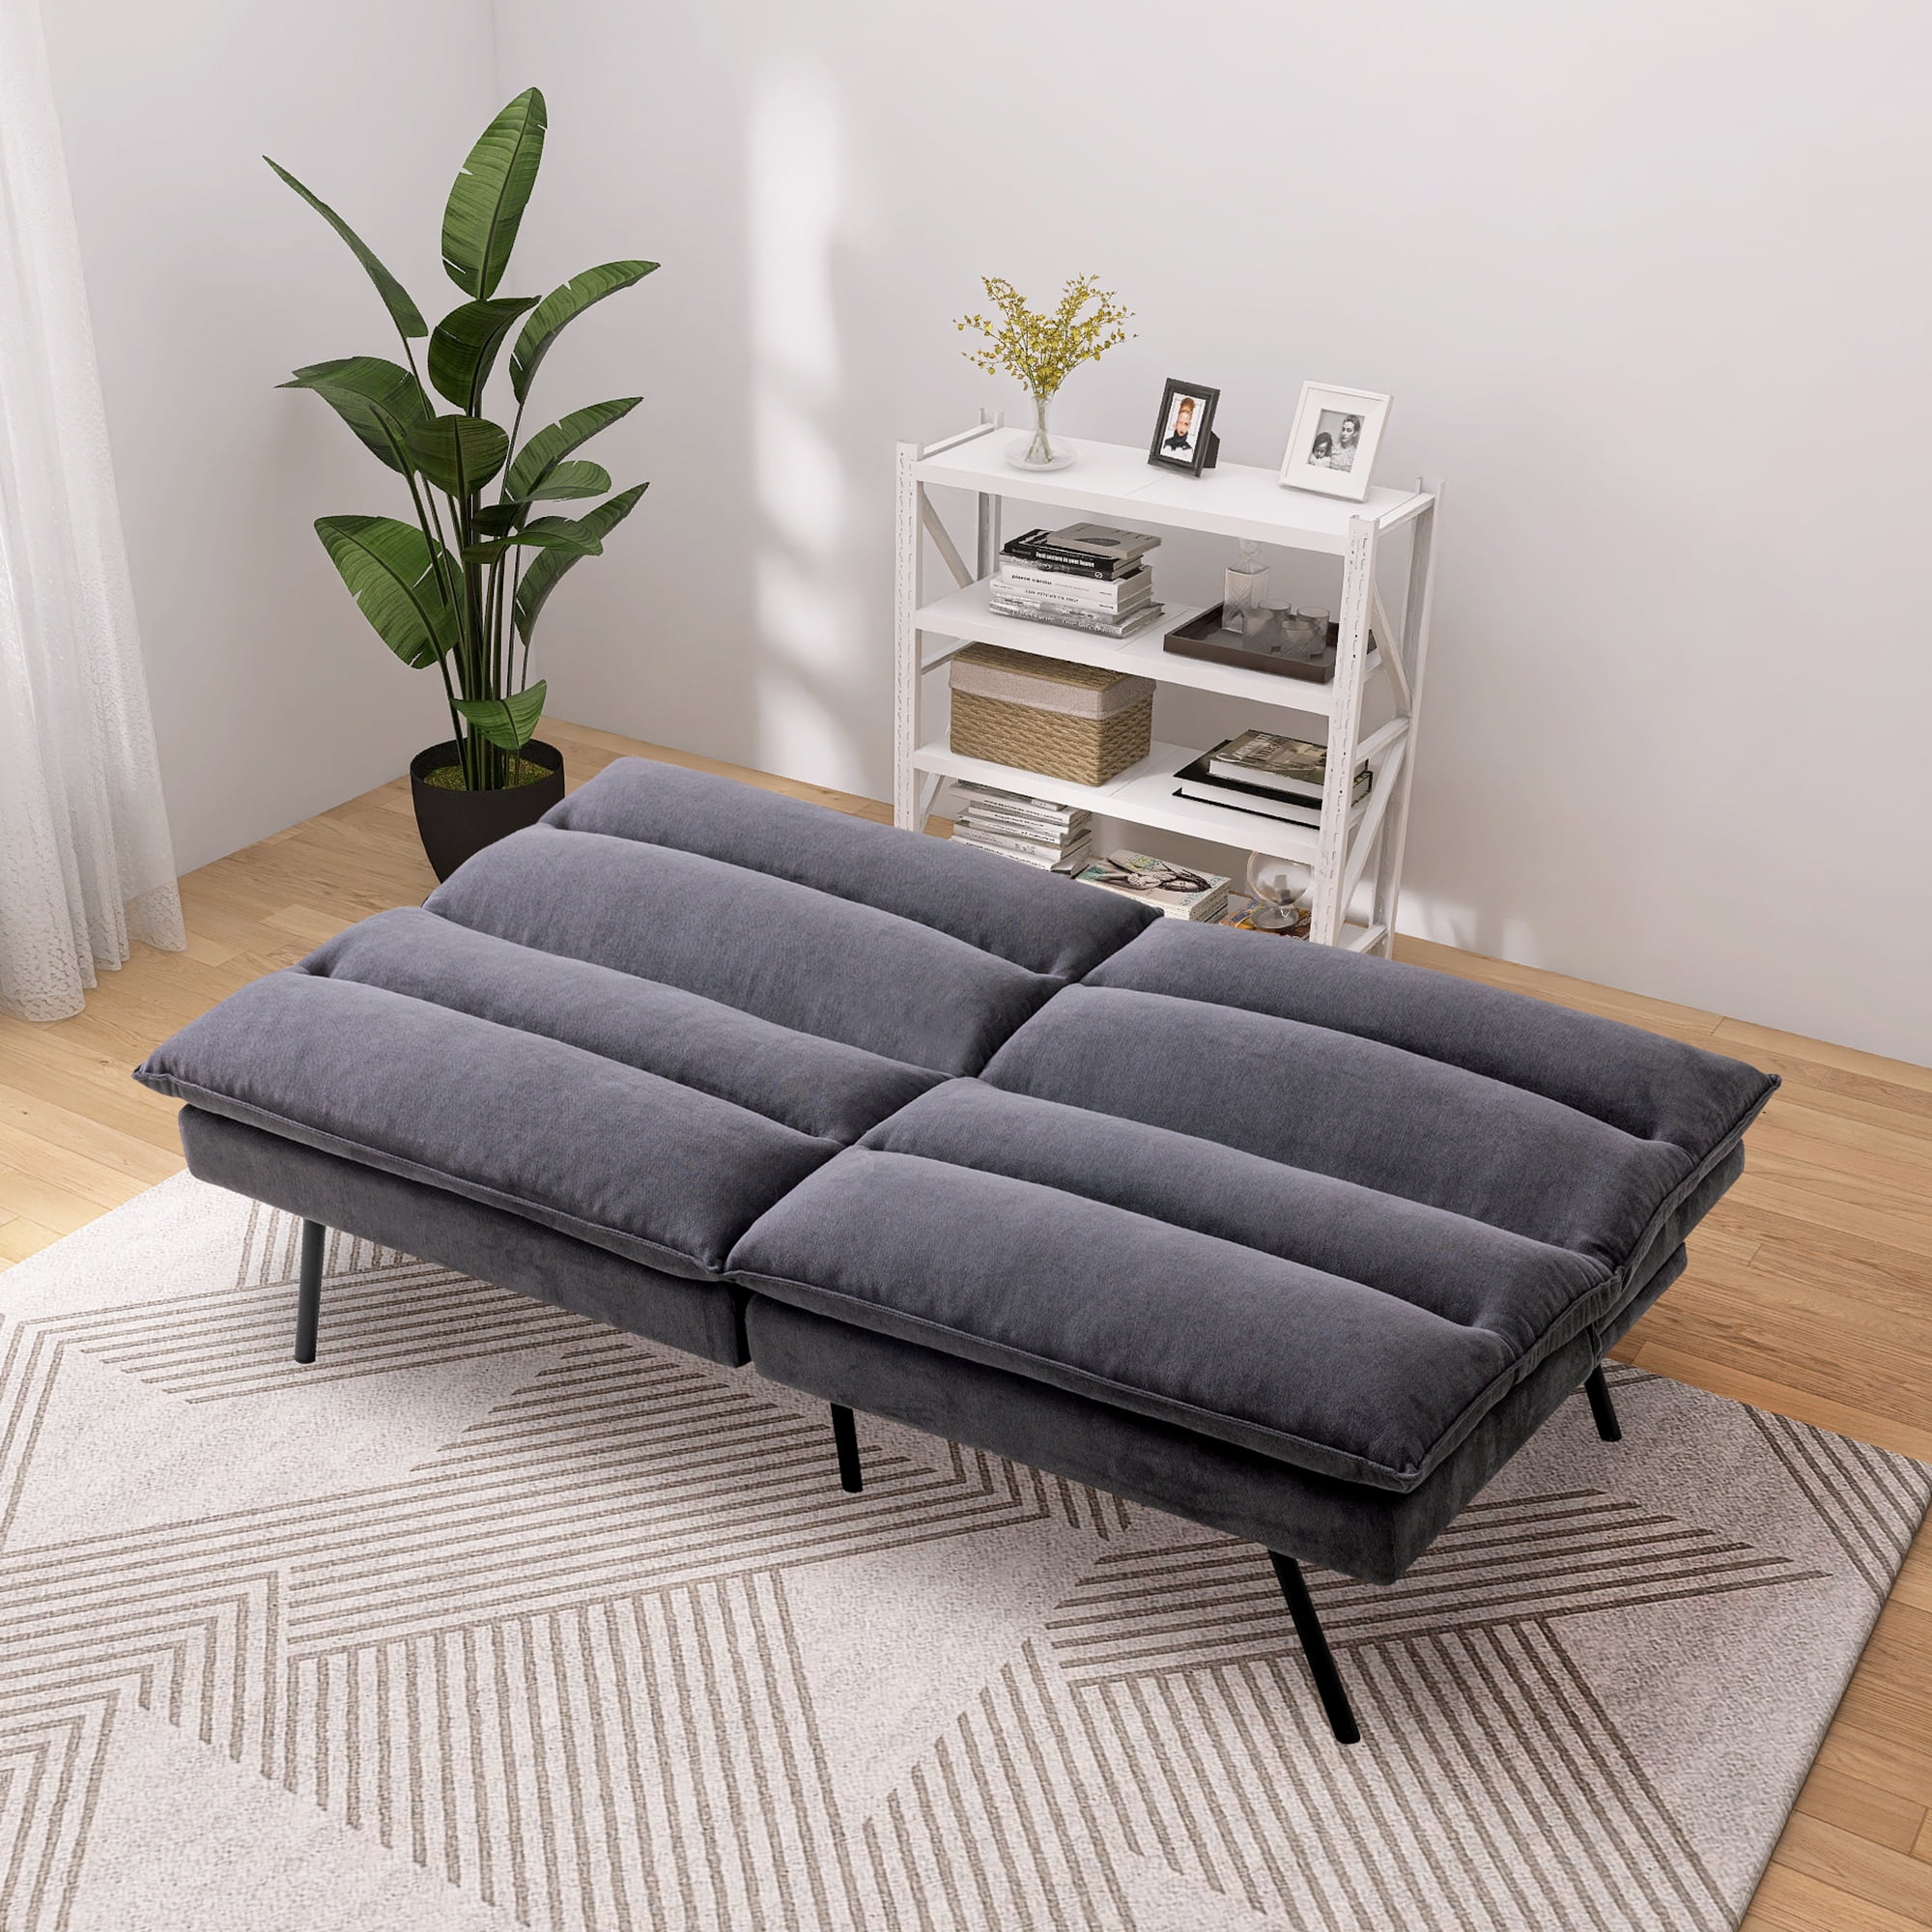  Hcore Convertible Futon Sofa Bed,Grey Fabric Memory Foam  Loveseat Futons Sofa Couch,Small Euro Lounger Sofa for Compact Living  Spaces,Apartment,Dorm,Studio,Guest Room, Home Office : Home & Kitchen